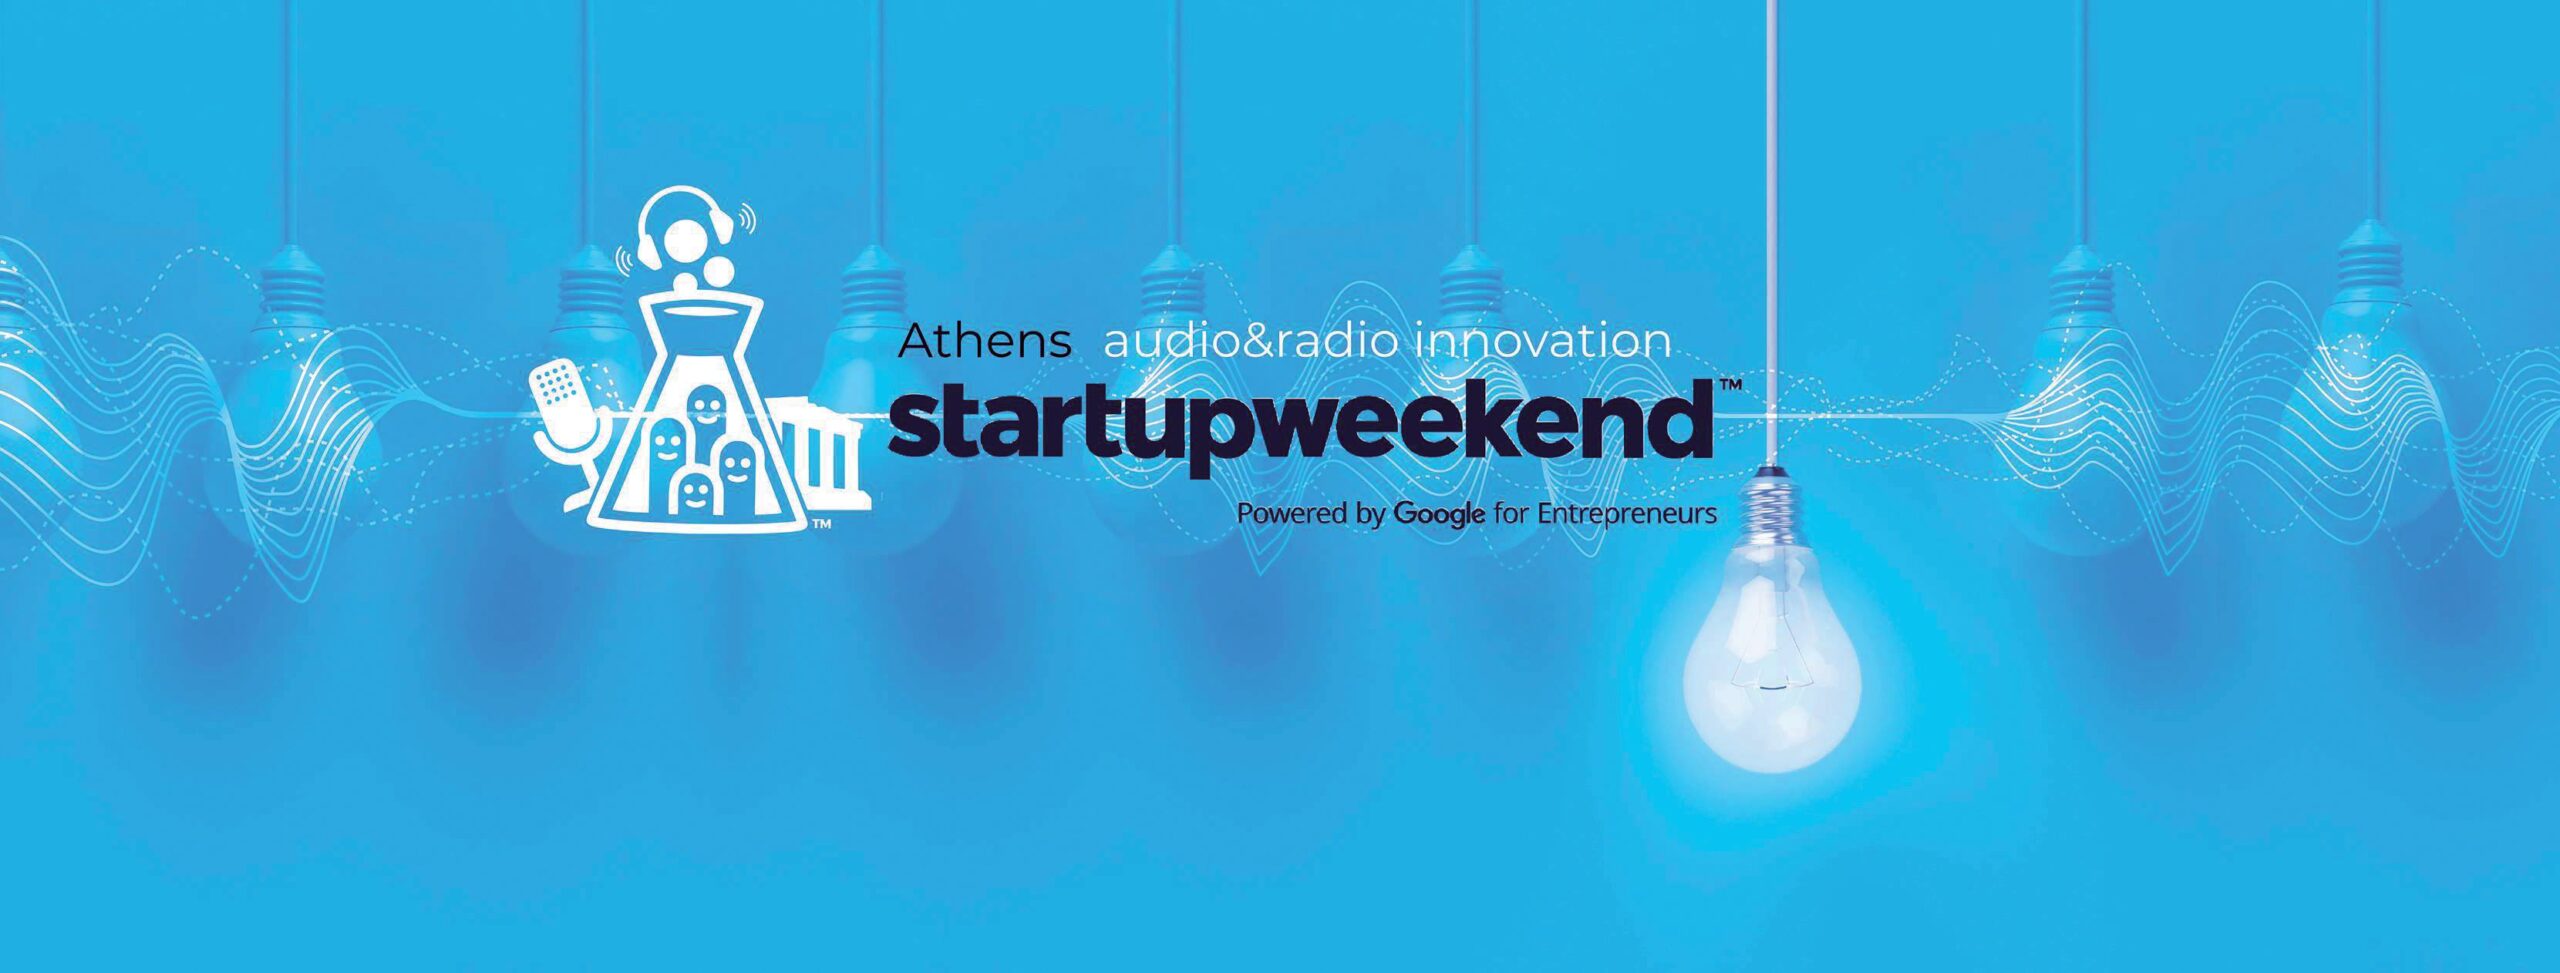 Startup weekend Athens Entrepreneurial Journalism: THE AUDIO & RADIO INNOVATION edition